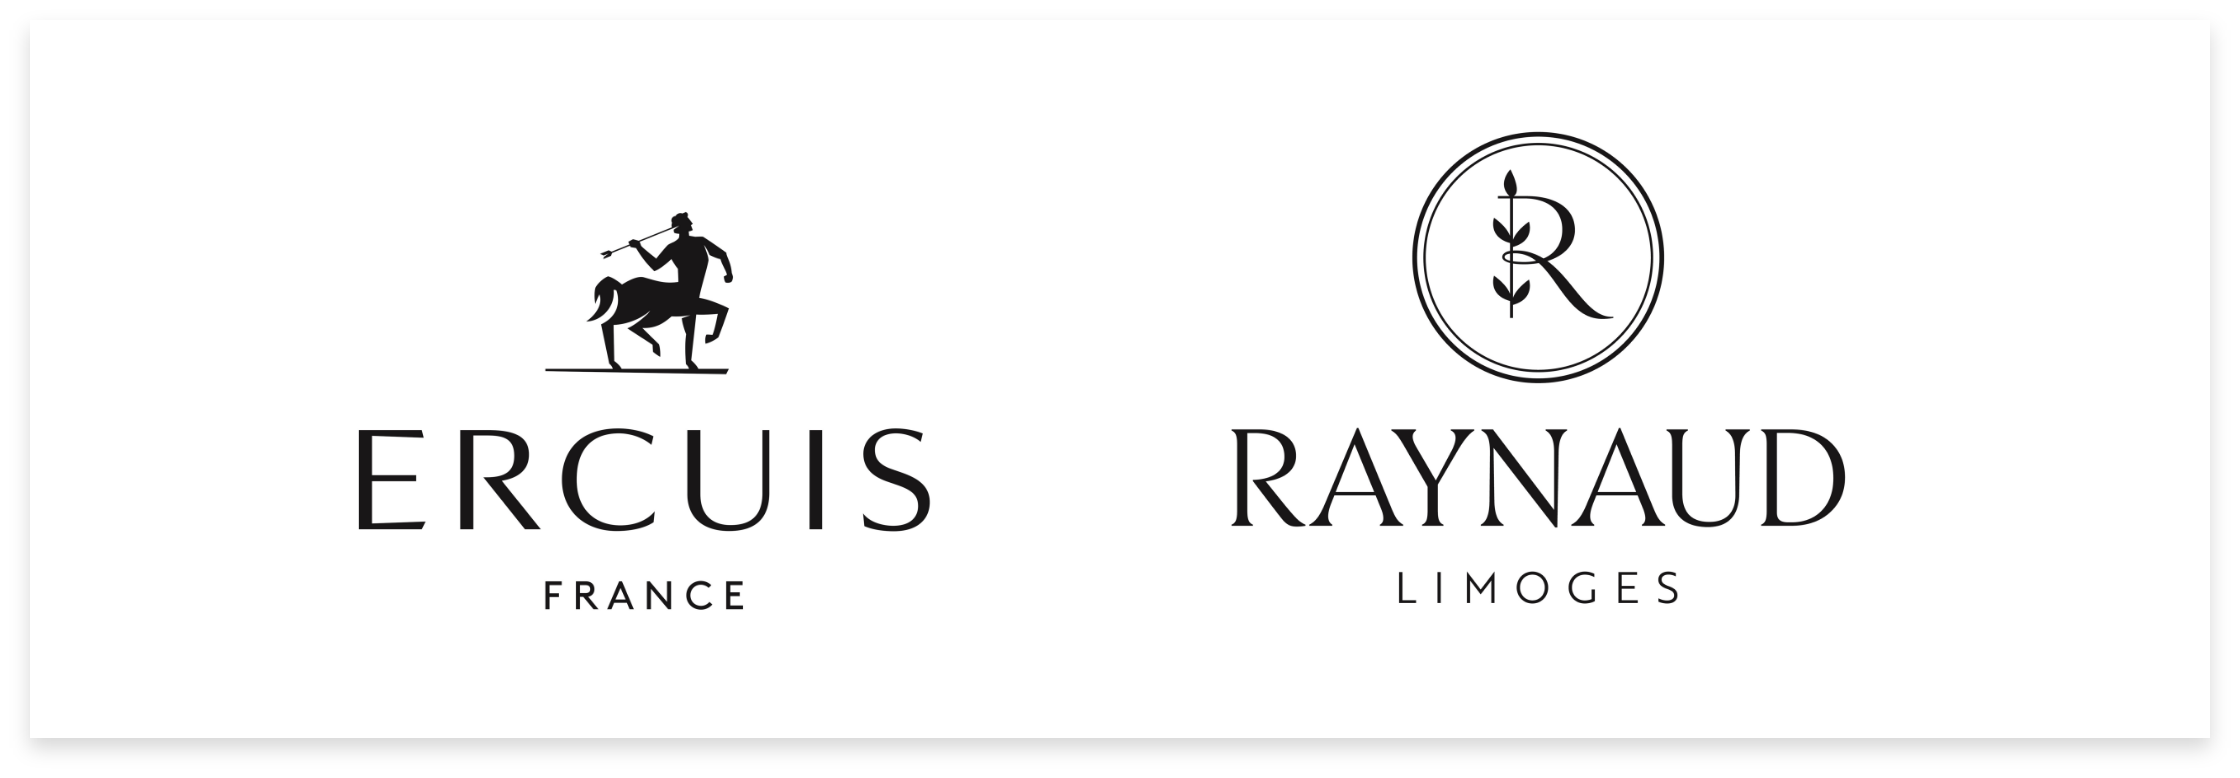 ERCUIS FRANCE RAYNAUD LIMOGES